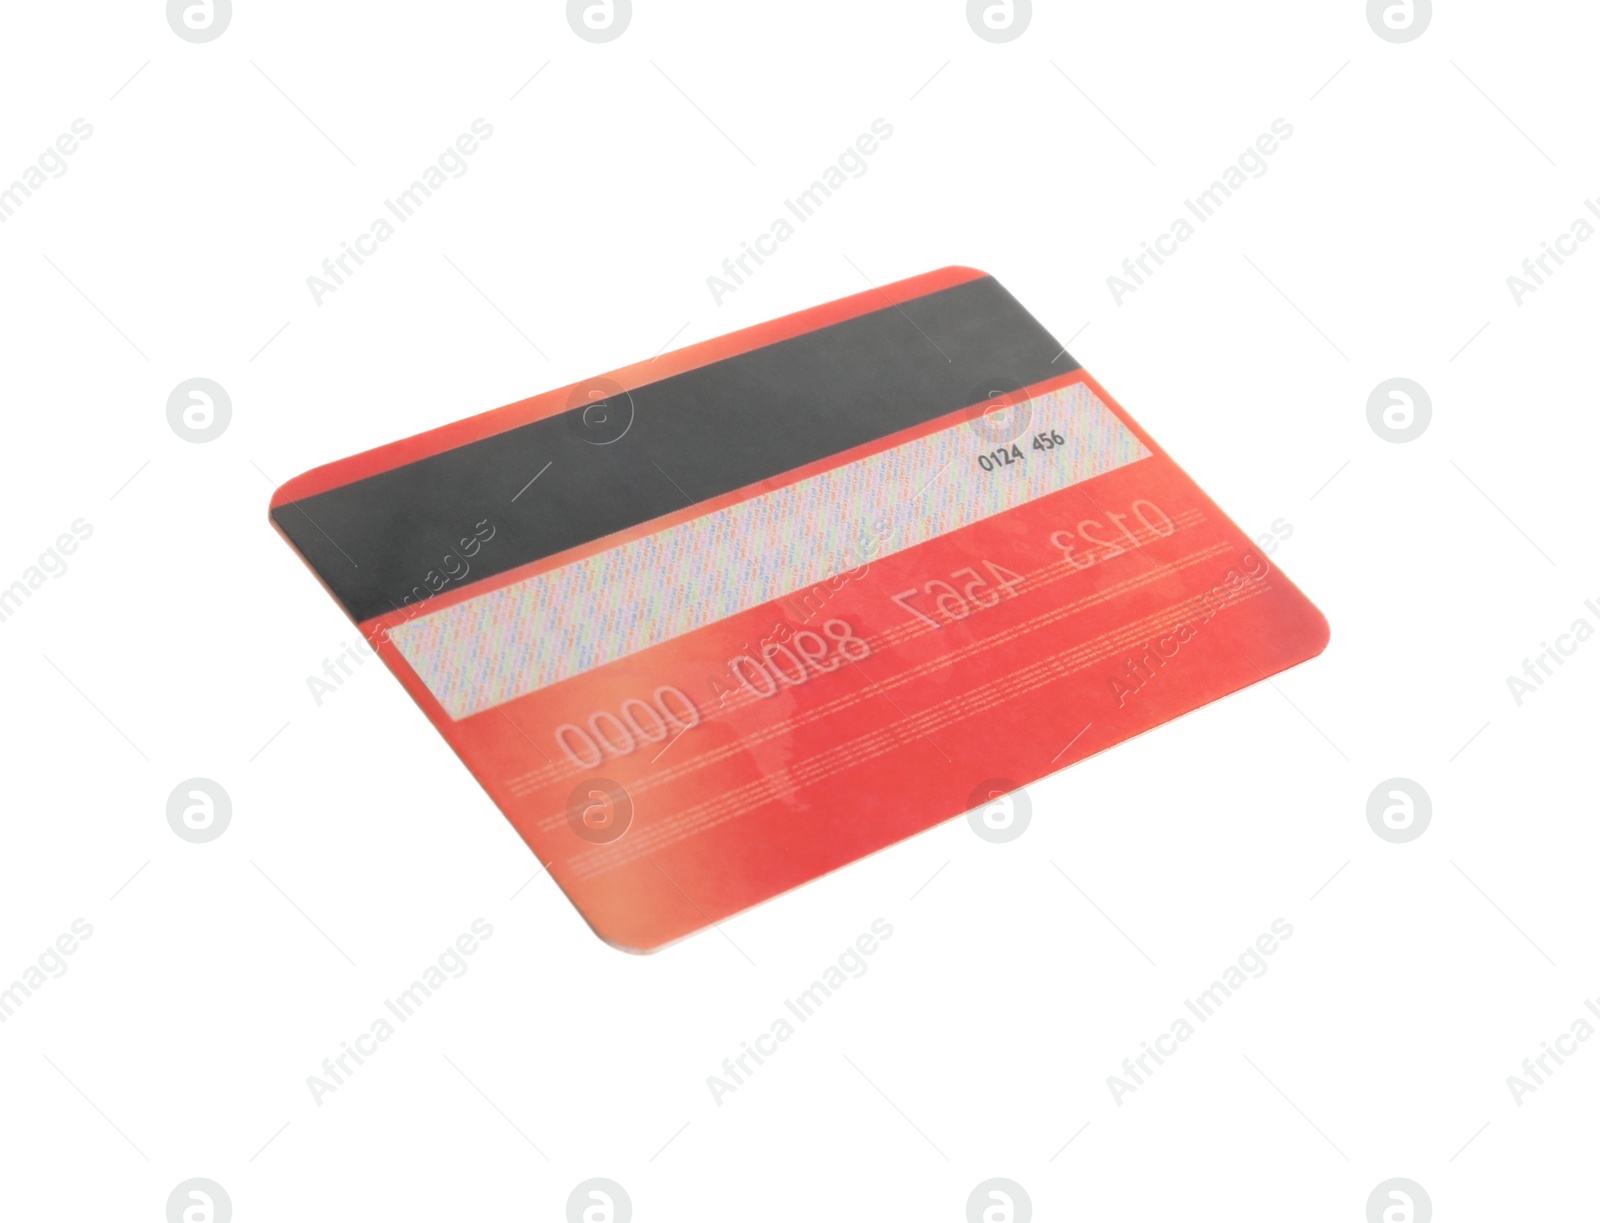 Photo of Red plastic credit card isolated on white